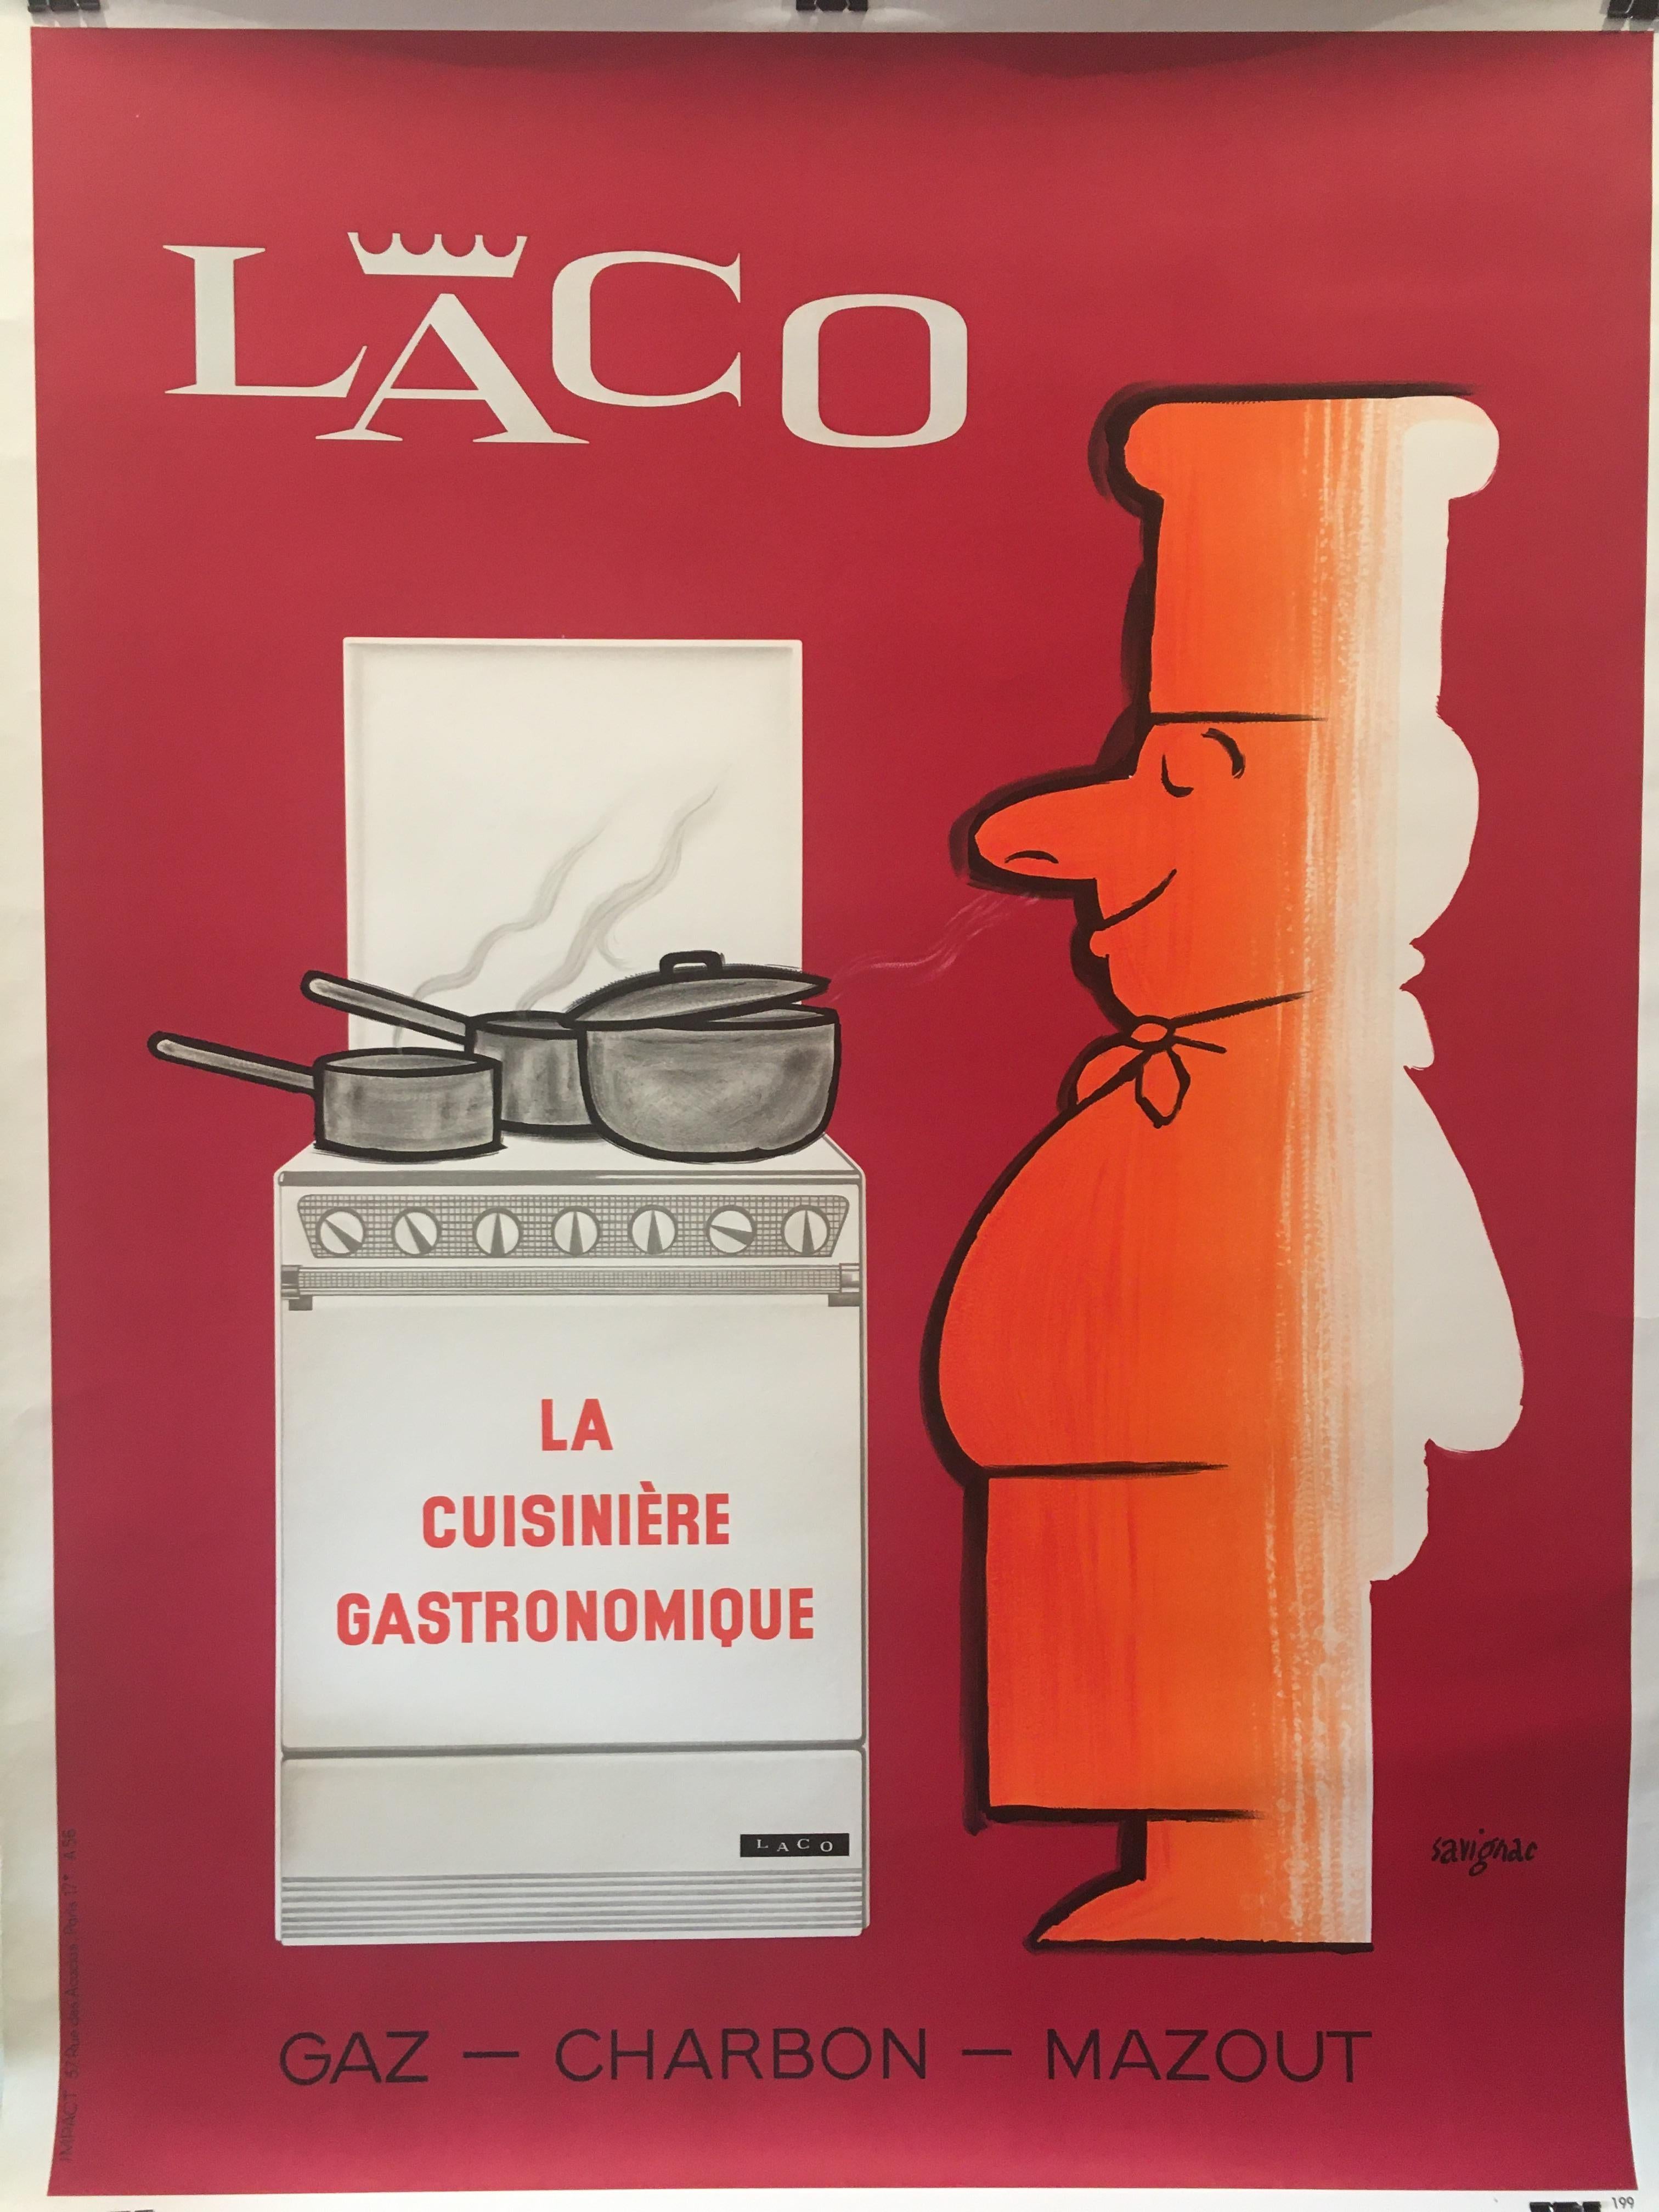 'Laco' by Raymond Savignac, original vintage mid-century poster.

A fun poster by Savignac in 1960, to advertise the French gastronomic kitchen appliances company – “Laco”. As the slogan says, they work on either gas, coil or fuel oil. The chef